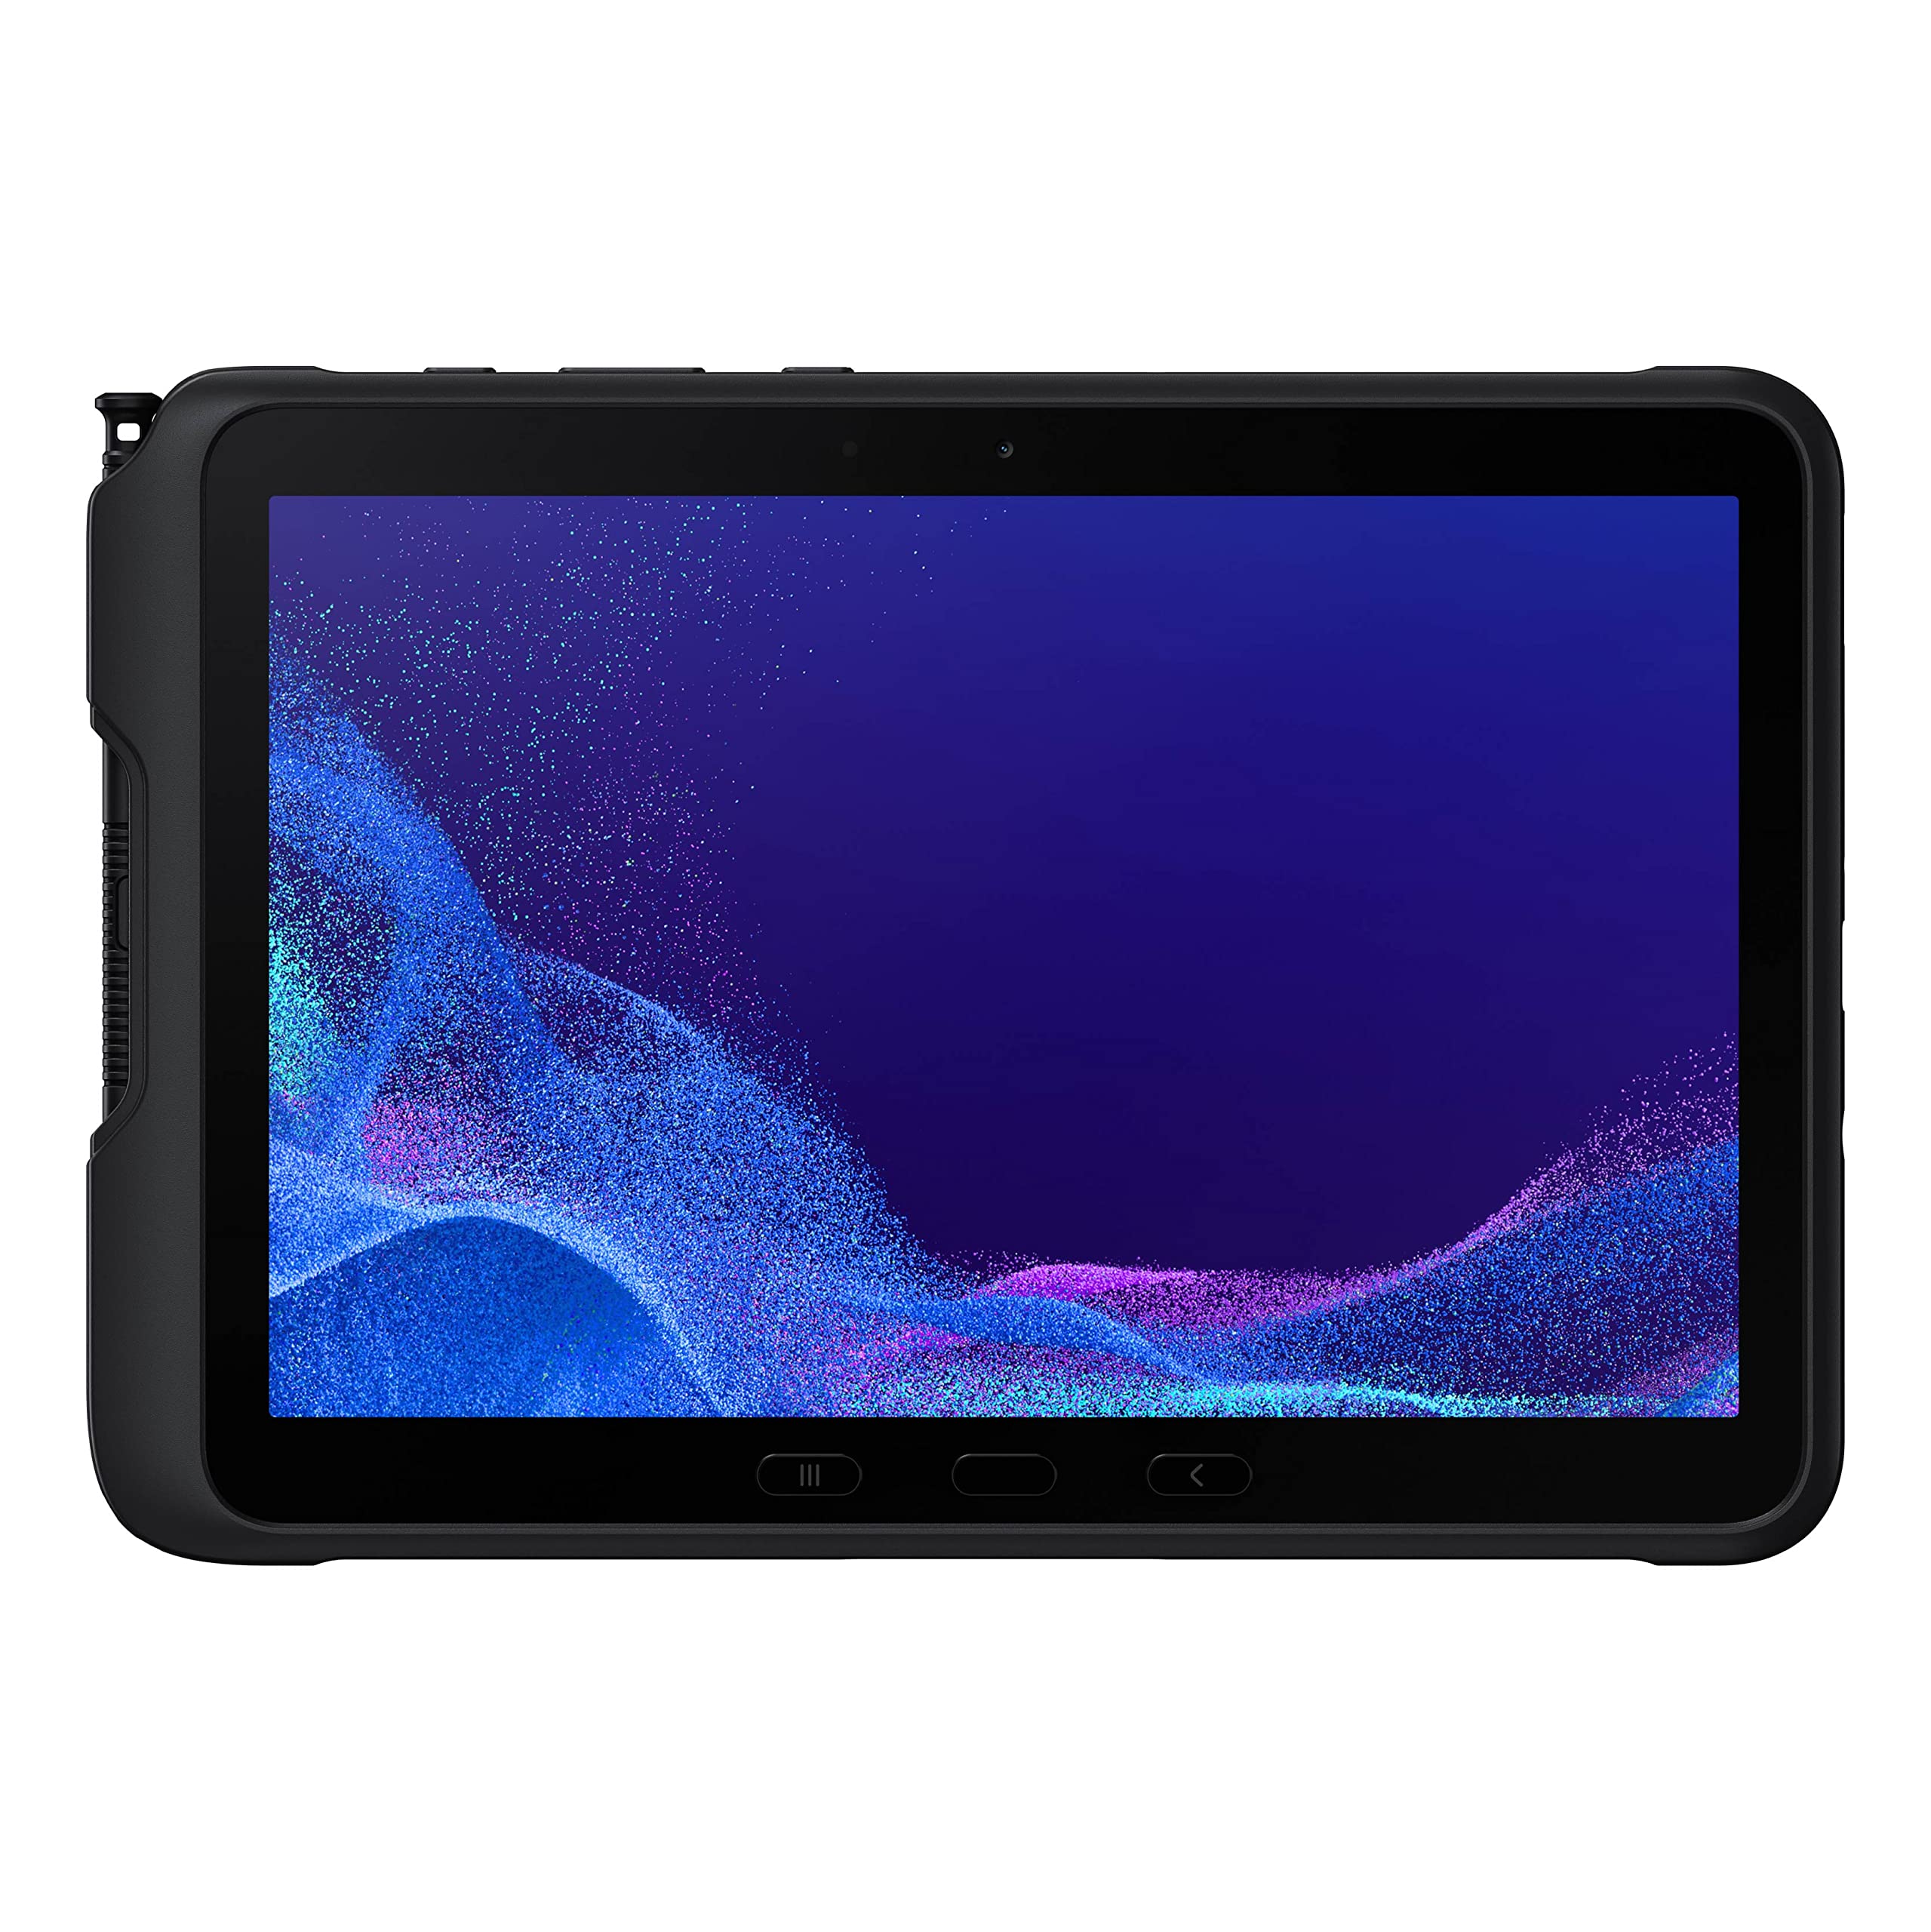 SAMSUNG Galaxy TabActive4 Pro 10.1” 64GB 5G Android Work Tablet, LTE Unlocked, 4GB RAM, Rugged Design, Sensitive Touchscreen, Long-Battery Life-for Workers, SM-T638UZKAN14, Black